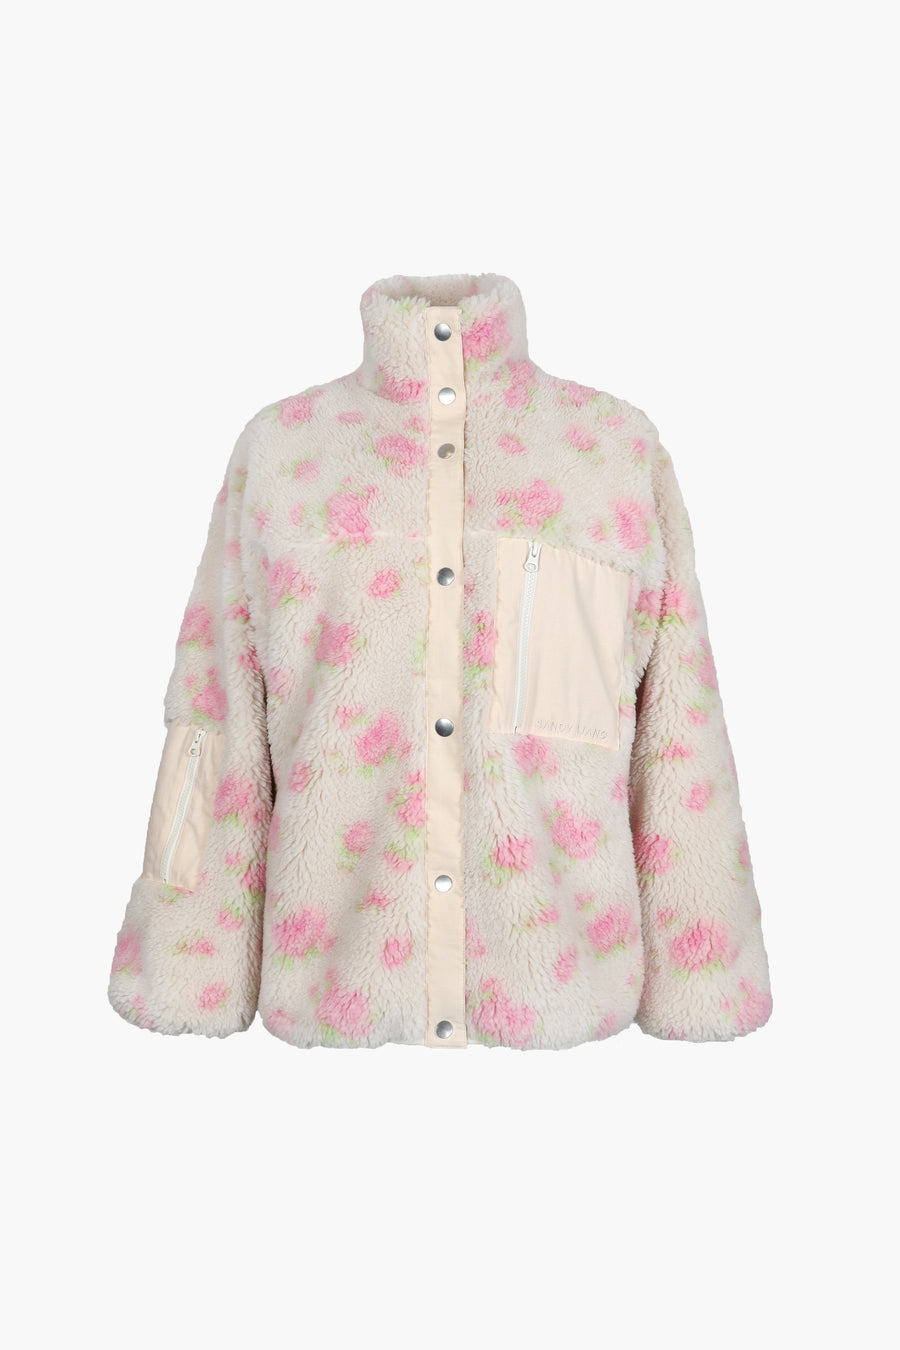 Fleece jacket in cream and pink floral print